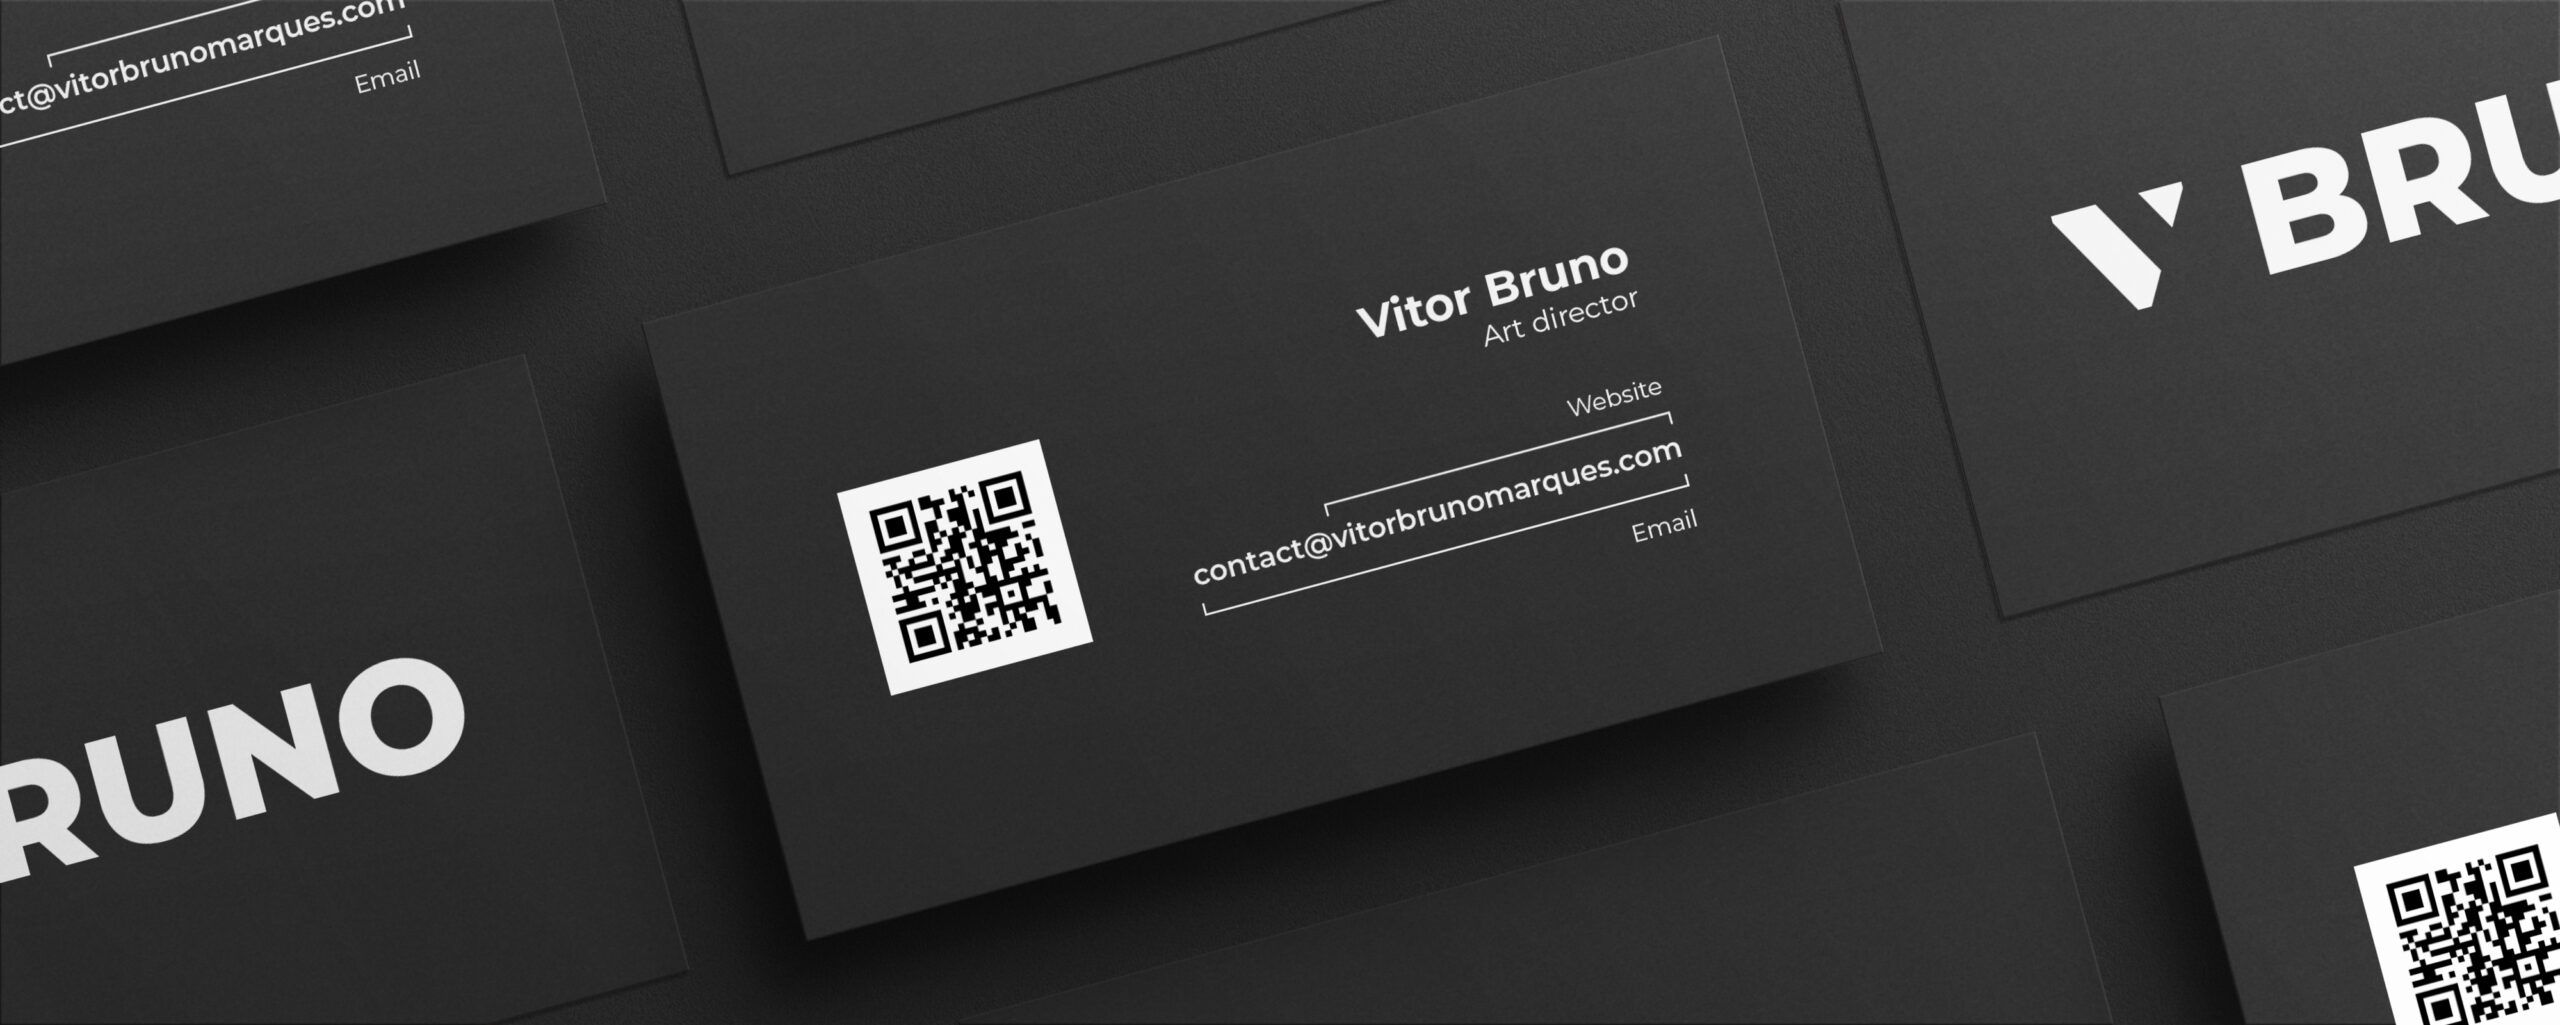 Vitor Bruno Bussiness Card